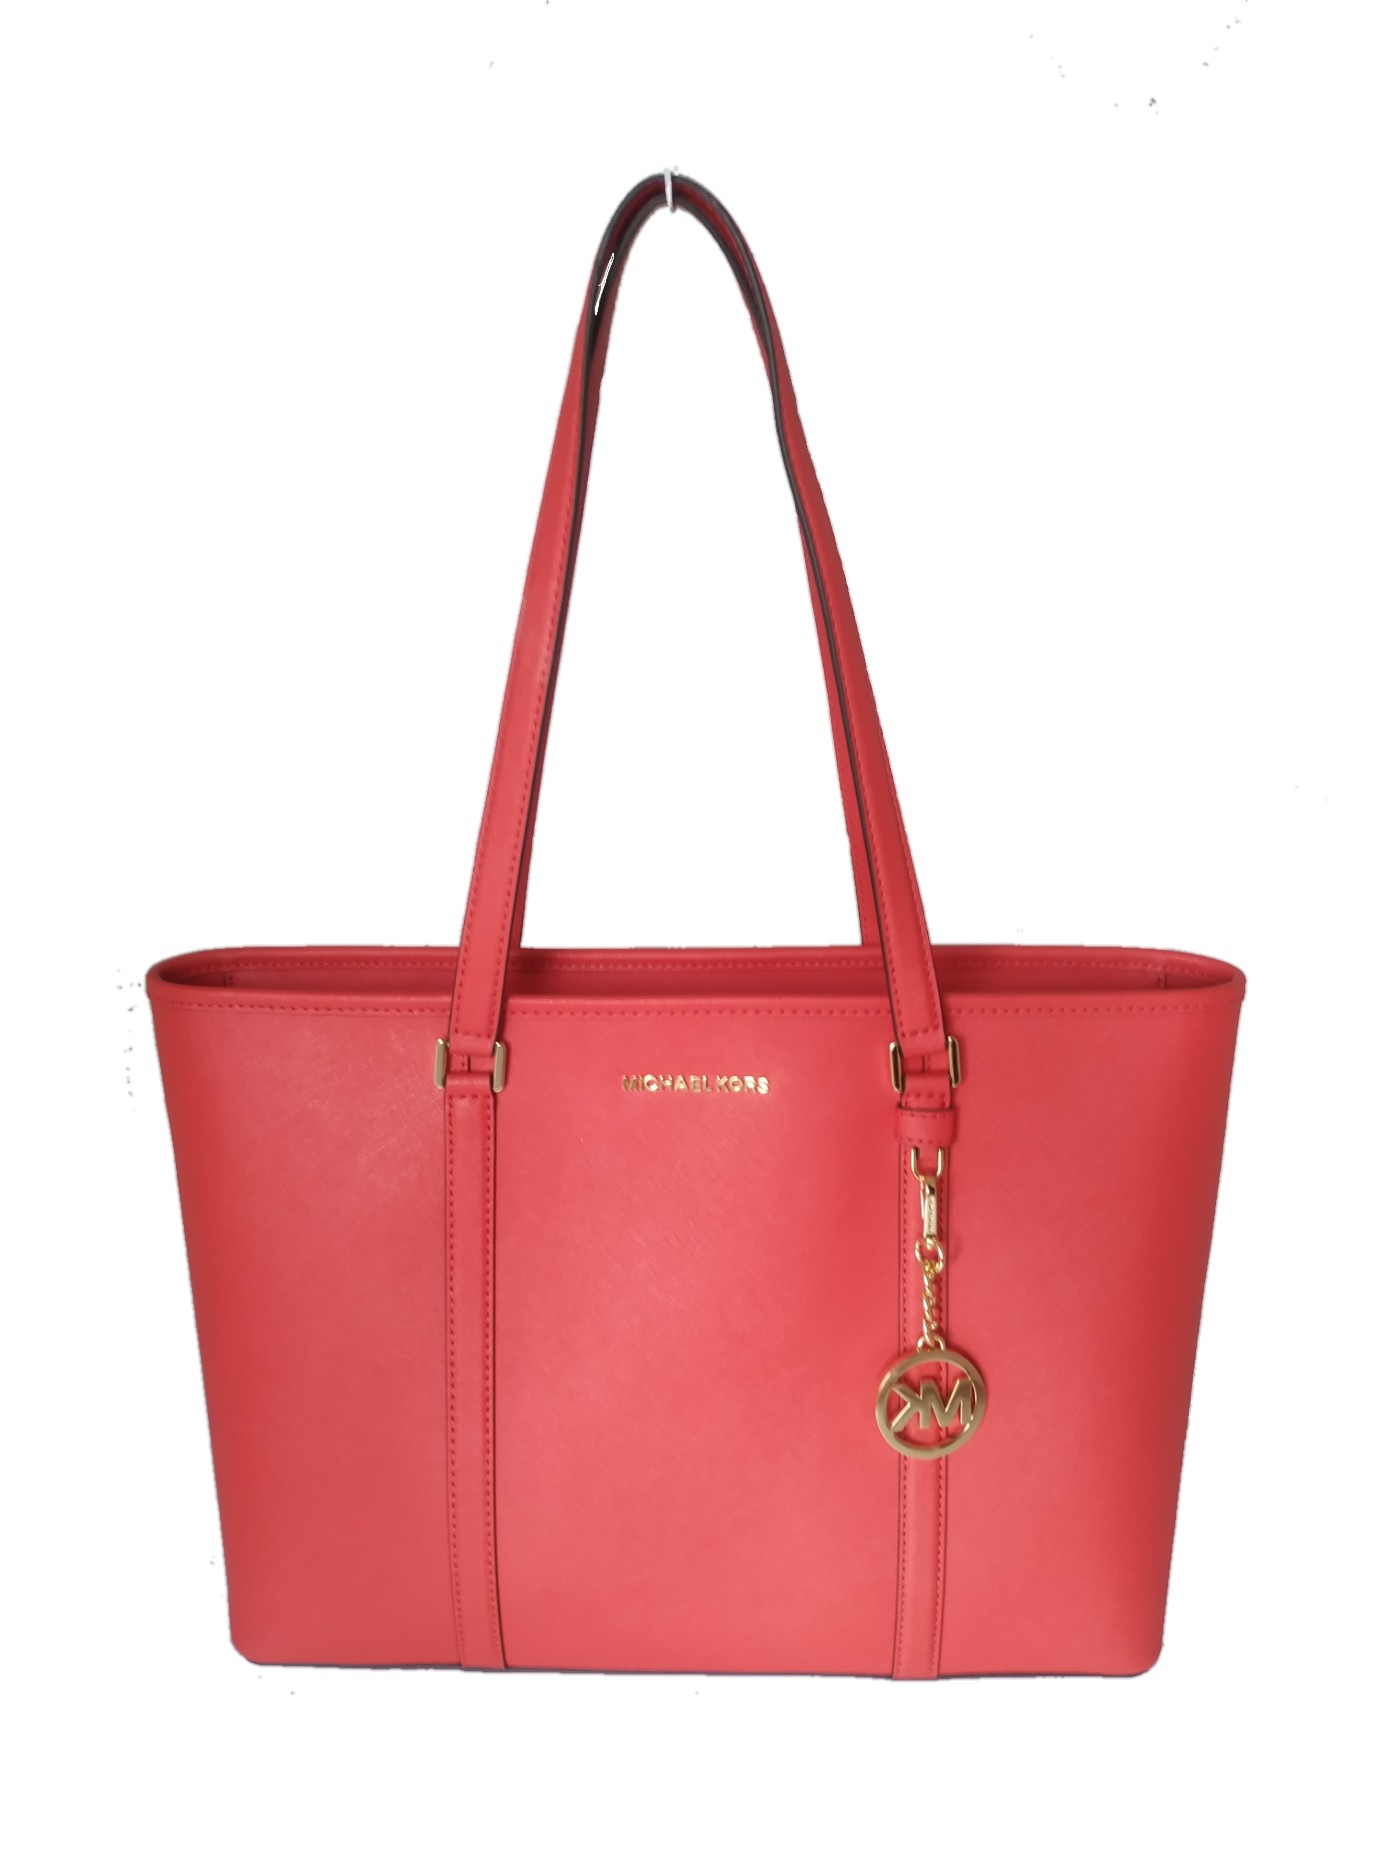 Michael Kors Sady Coral in Saffiano Leather | eBay